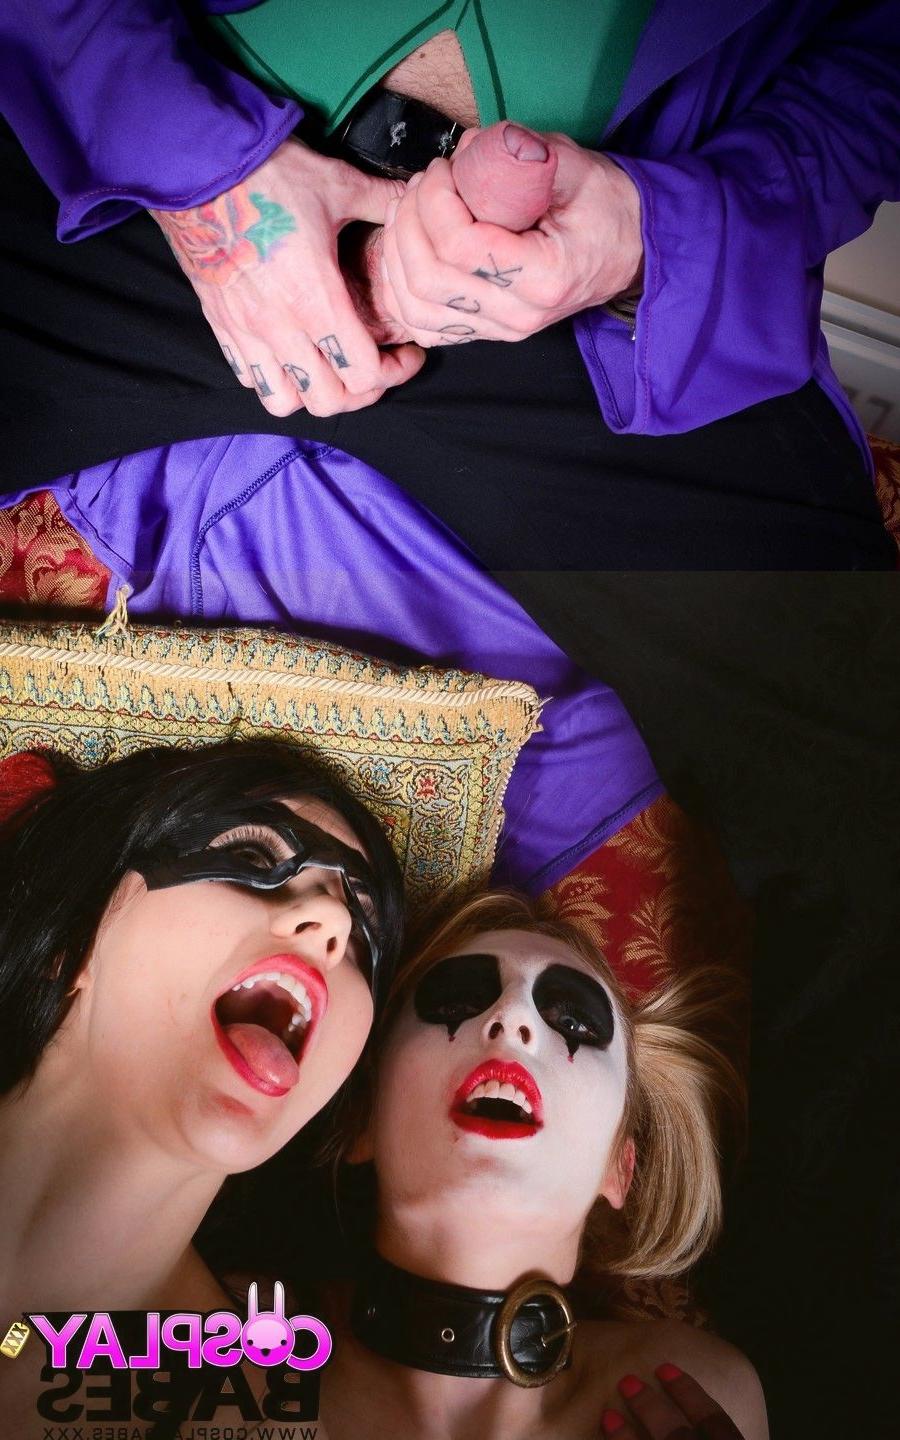 Jessica Jansen and Tina Kay form a threesome with the Jokers Photo